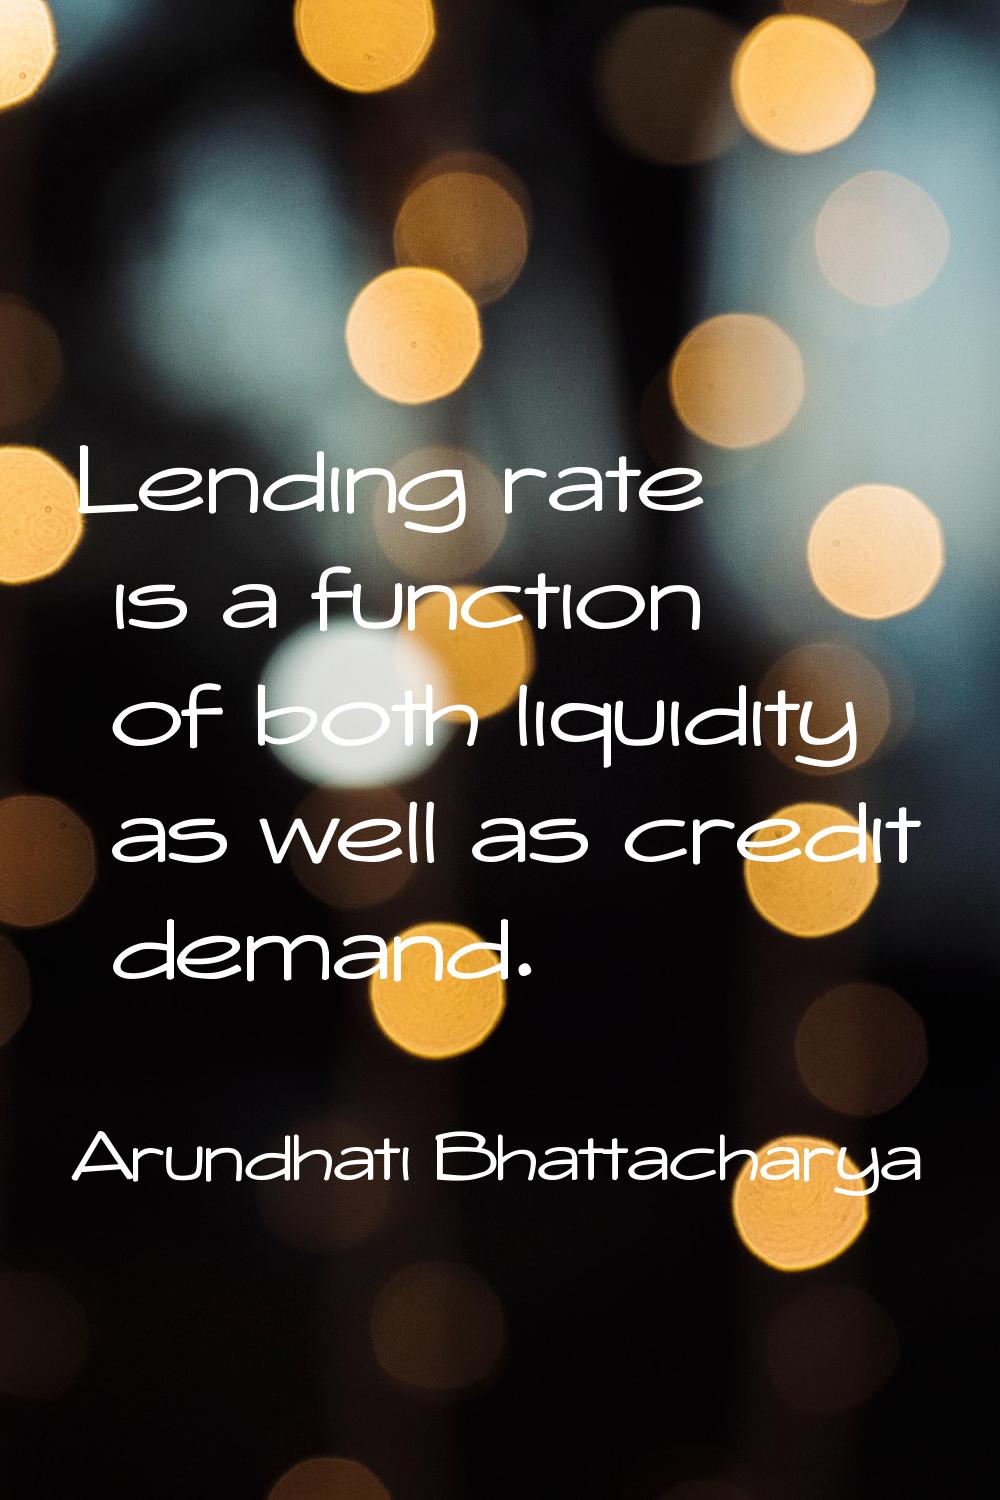 Lending rate is a function of both liquidity as well as credit demand.